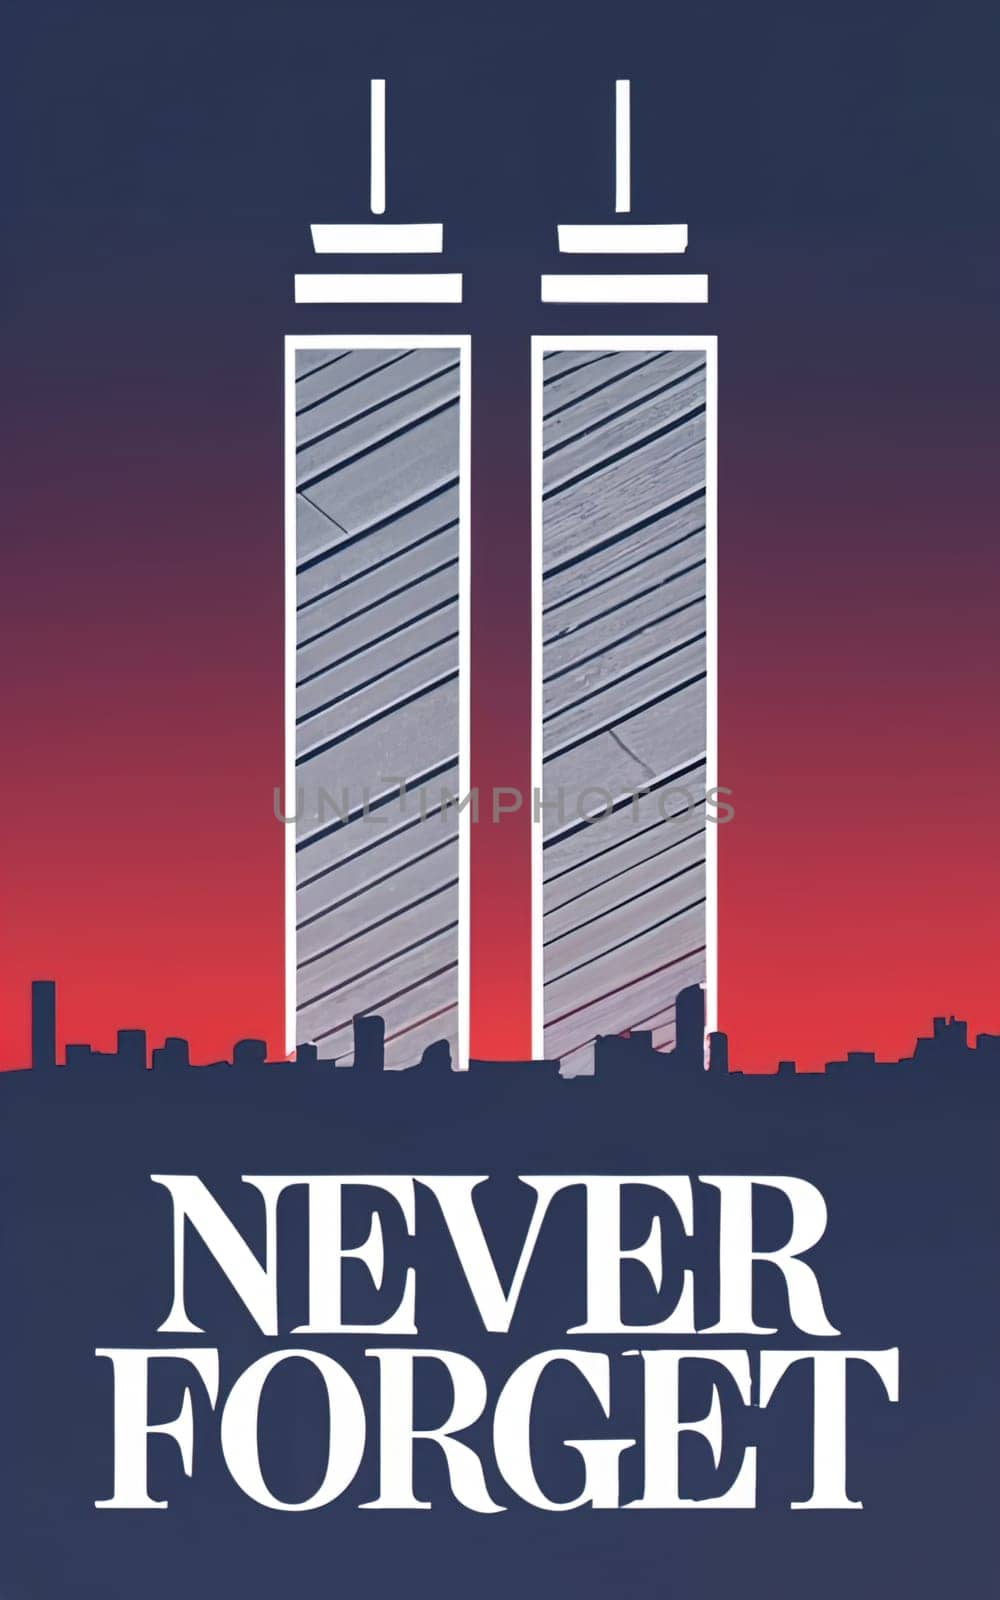 Illustration of Twin Towers with Red 'Never Forget' Typography - Commemorative Artwork download image